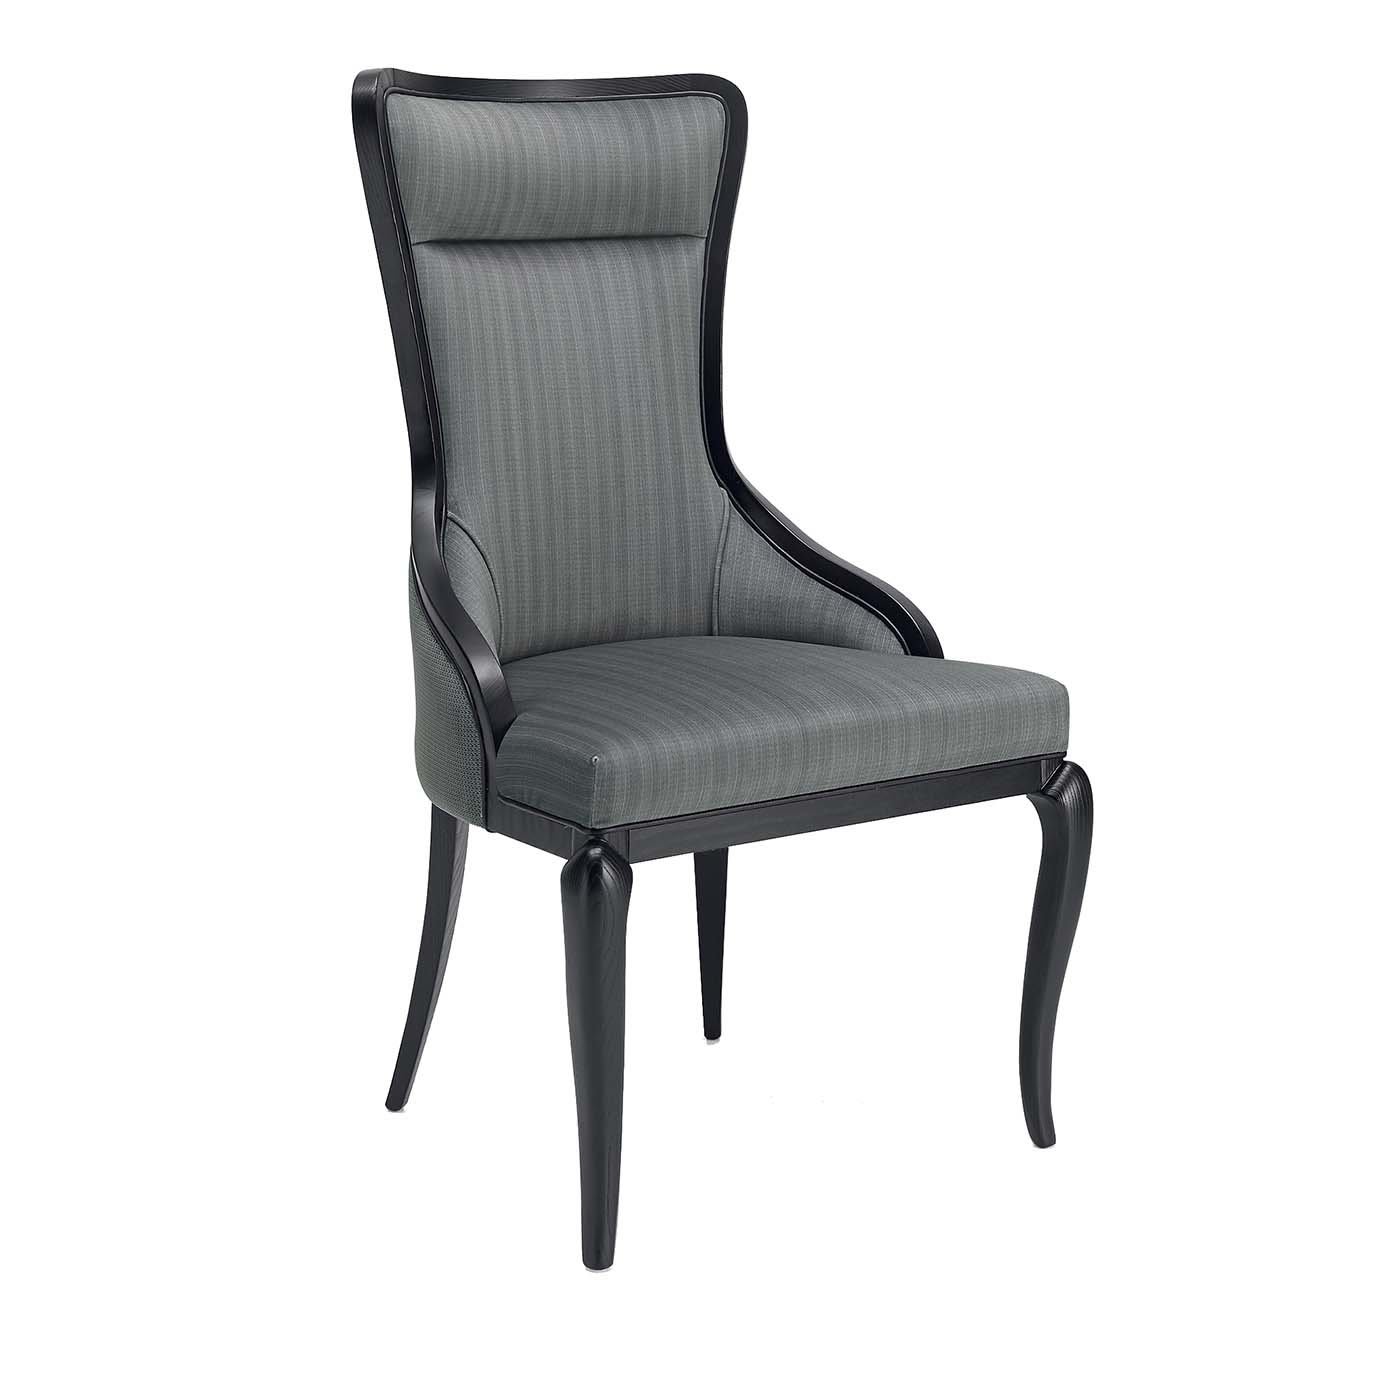 Gray Upholstered Chair - A.R. Arredamenti